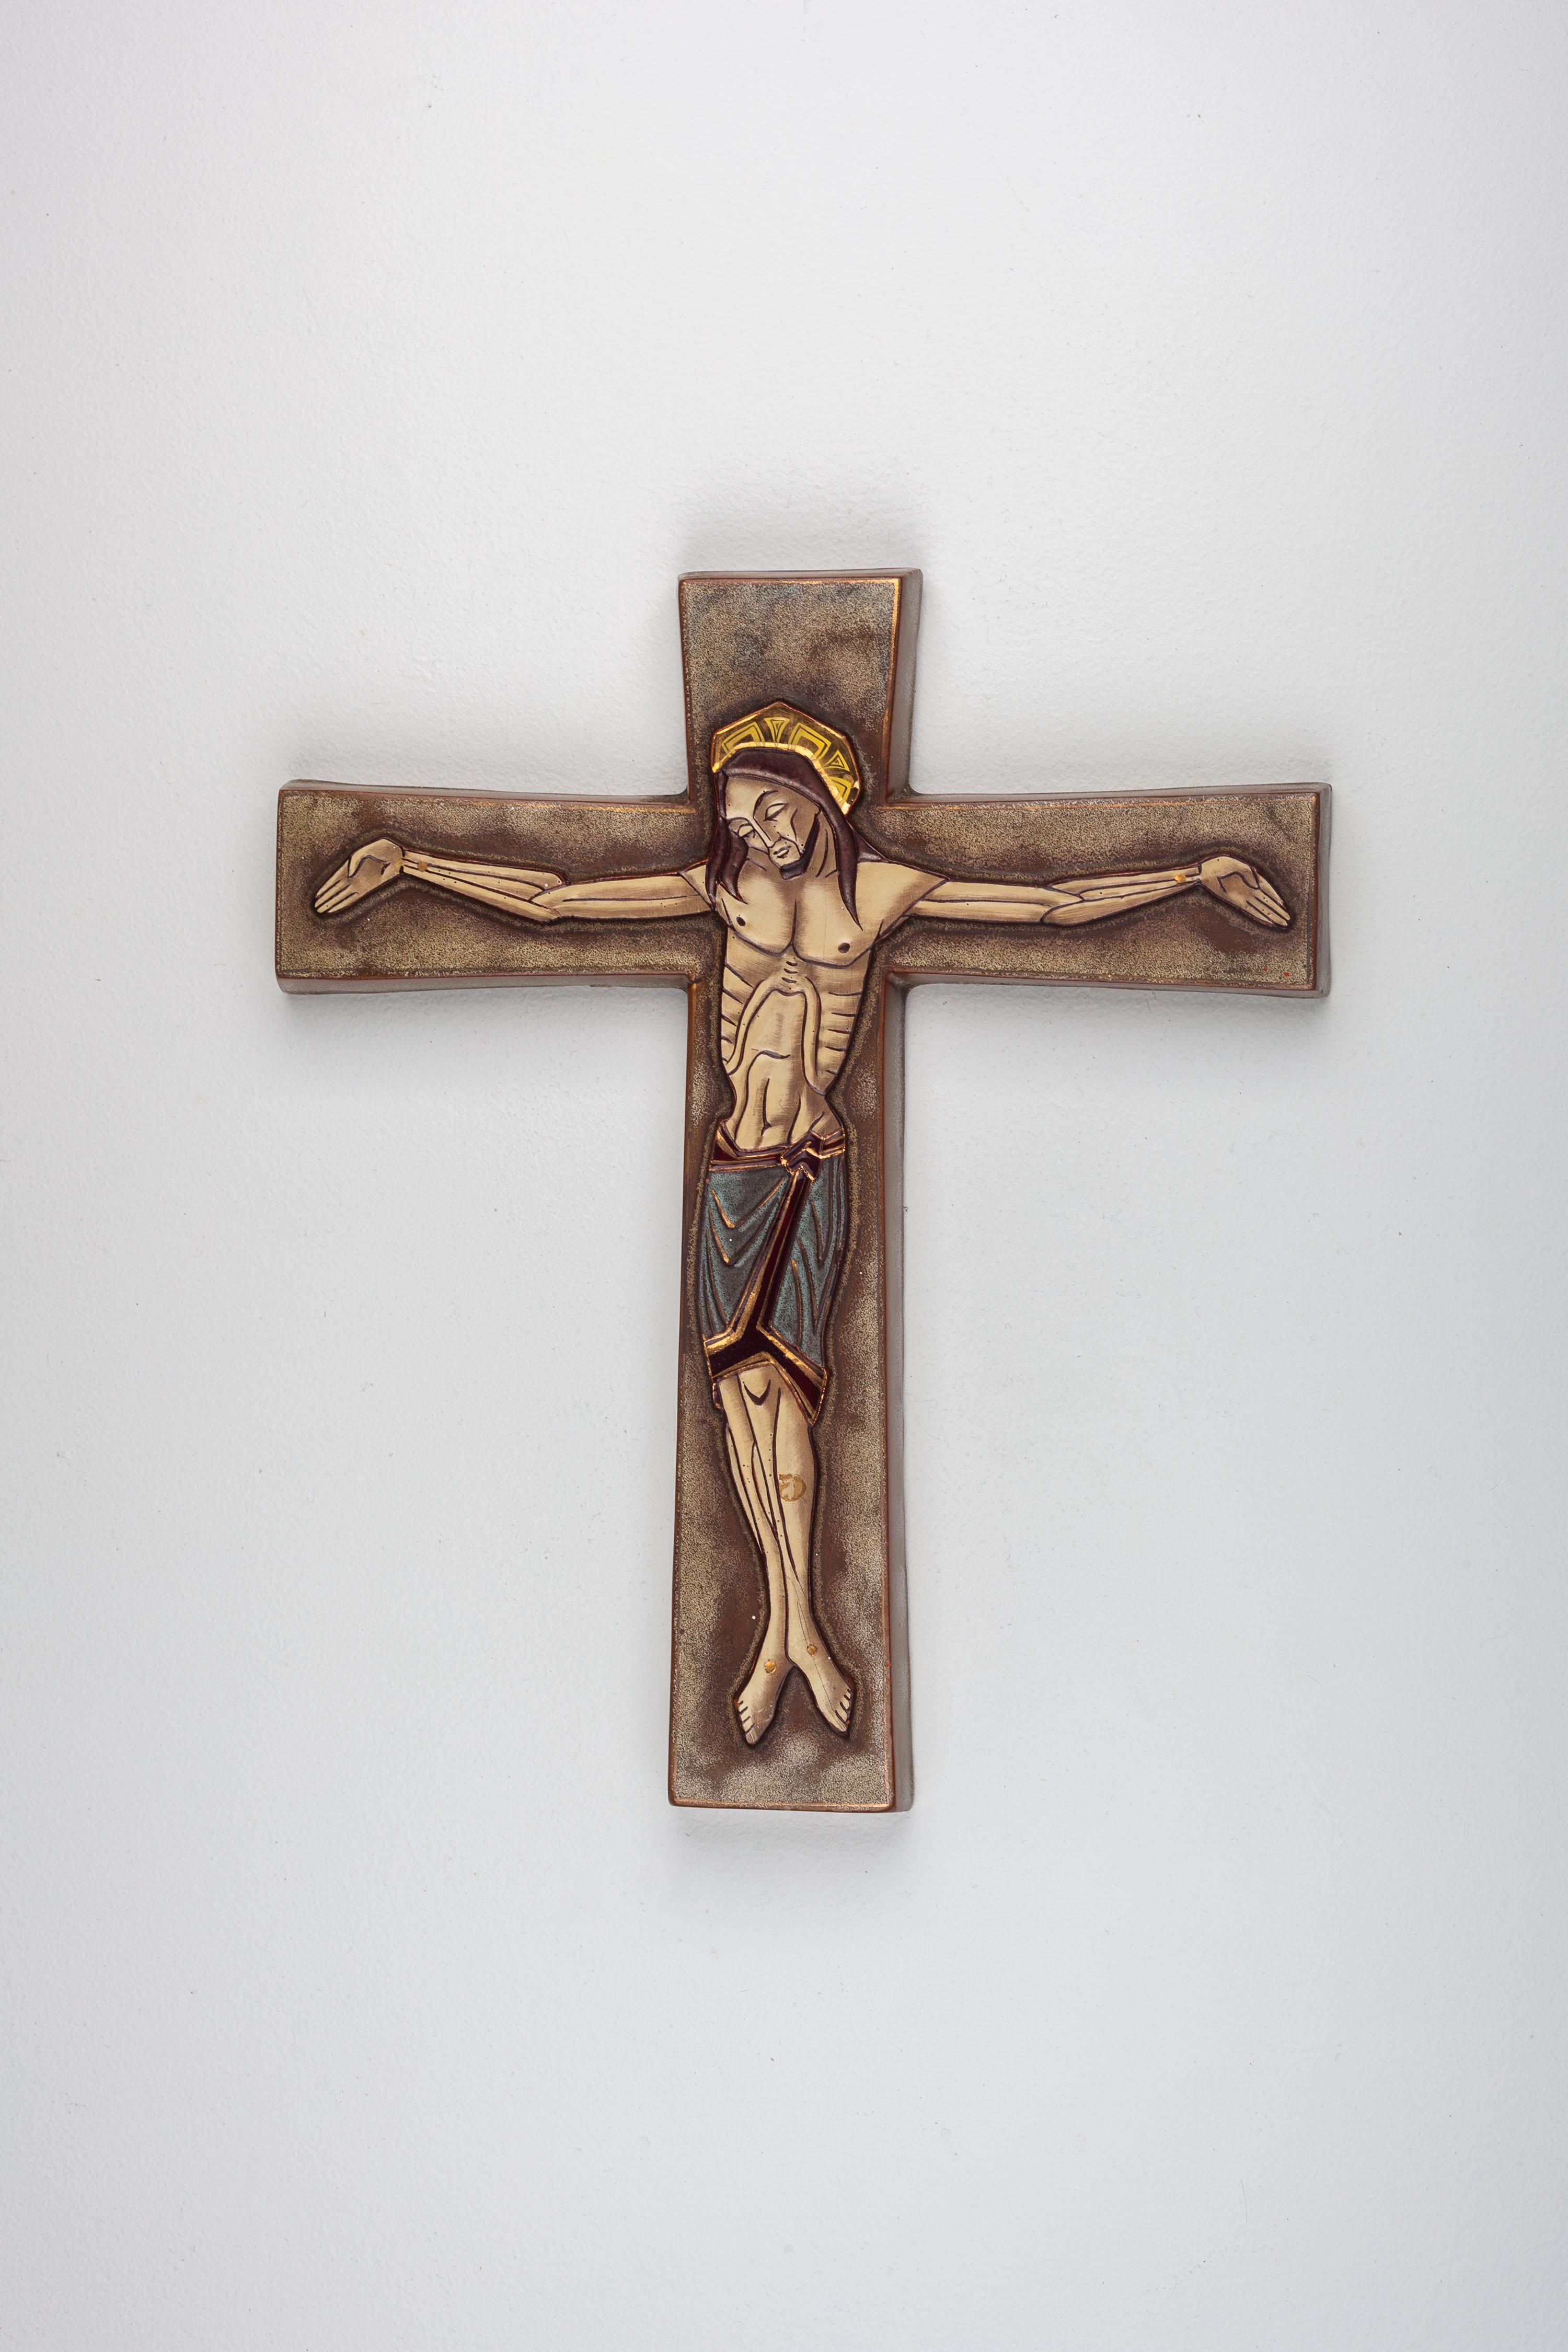 Modernist Wall Cross, Jesus, Gold accents, European Ceramic In Good Condition For Sale In Chicago, IL